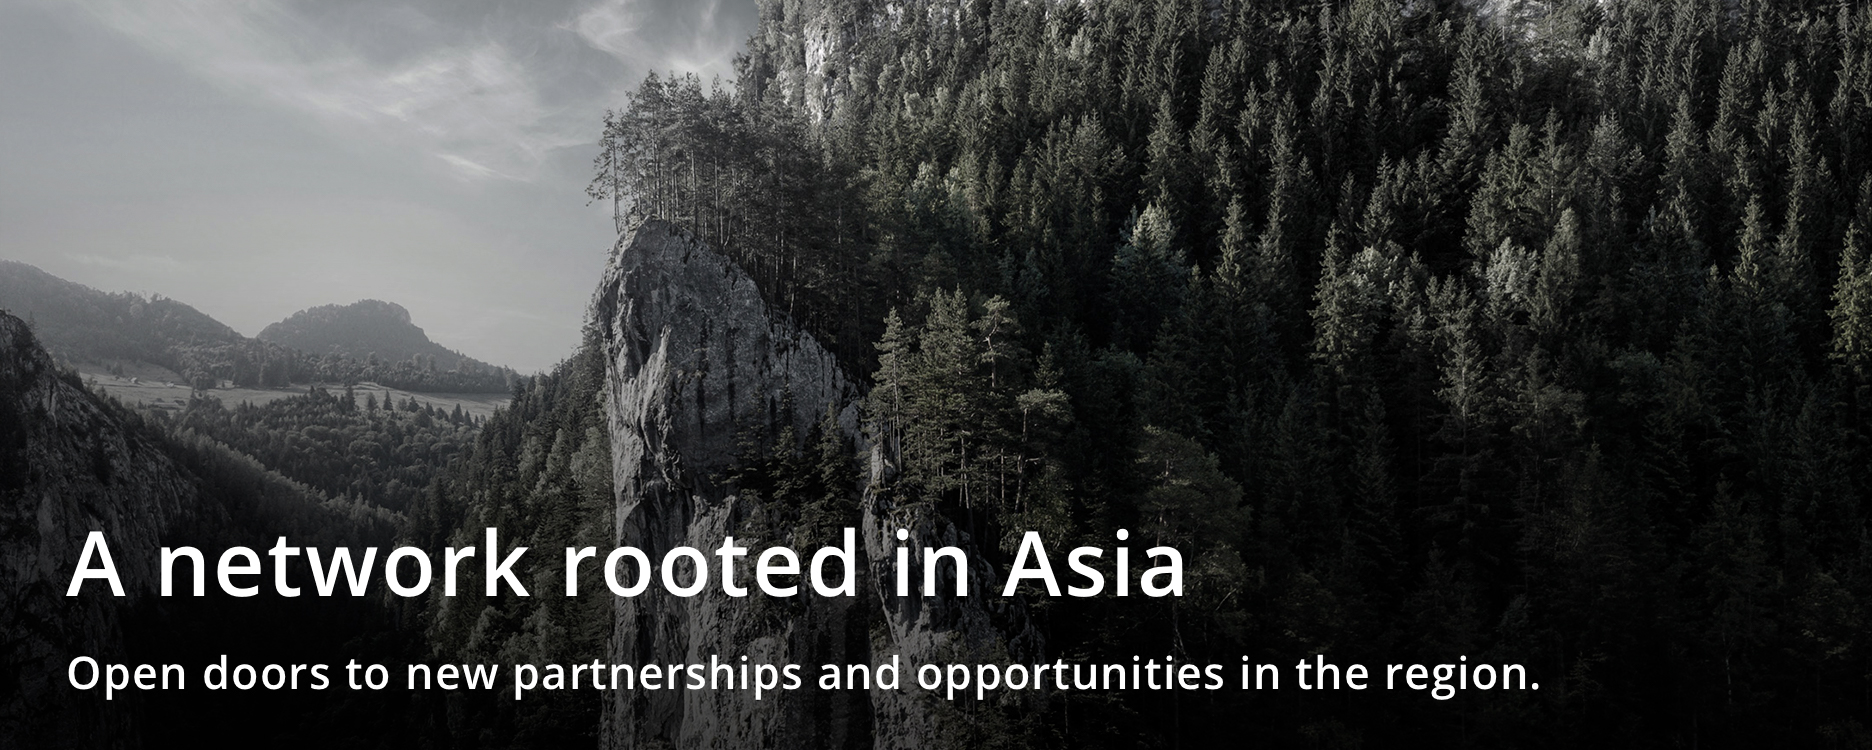 A network rooted in Asia